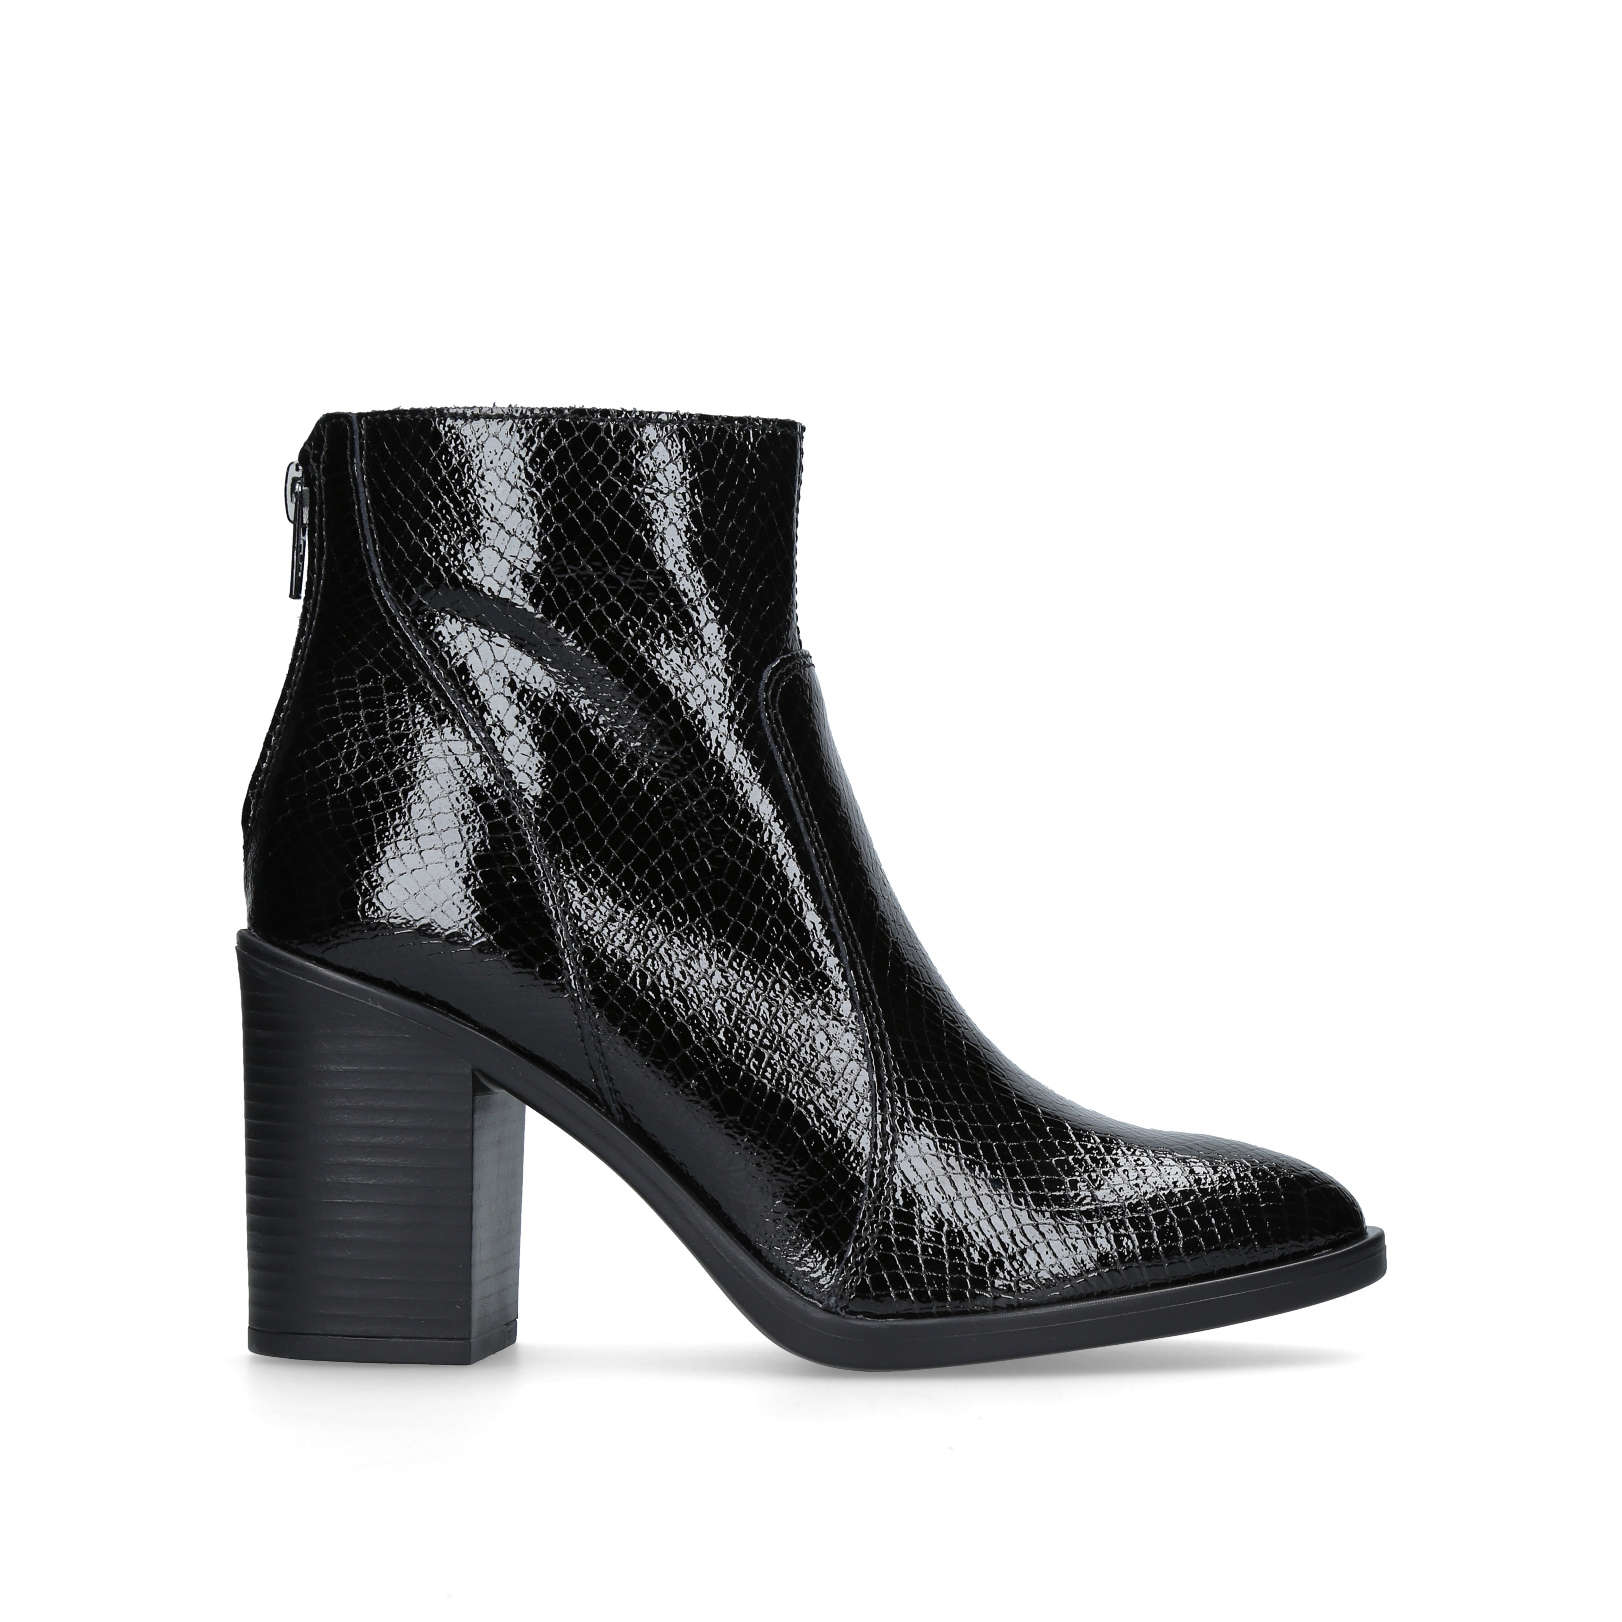 SLY - KURT GEIGER LONDON Ankle Boots